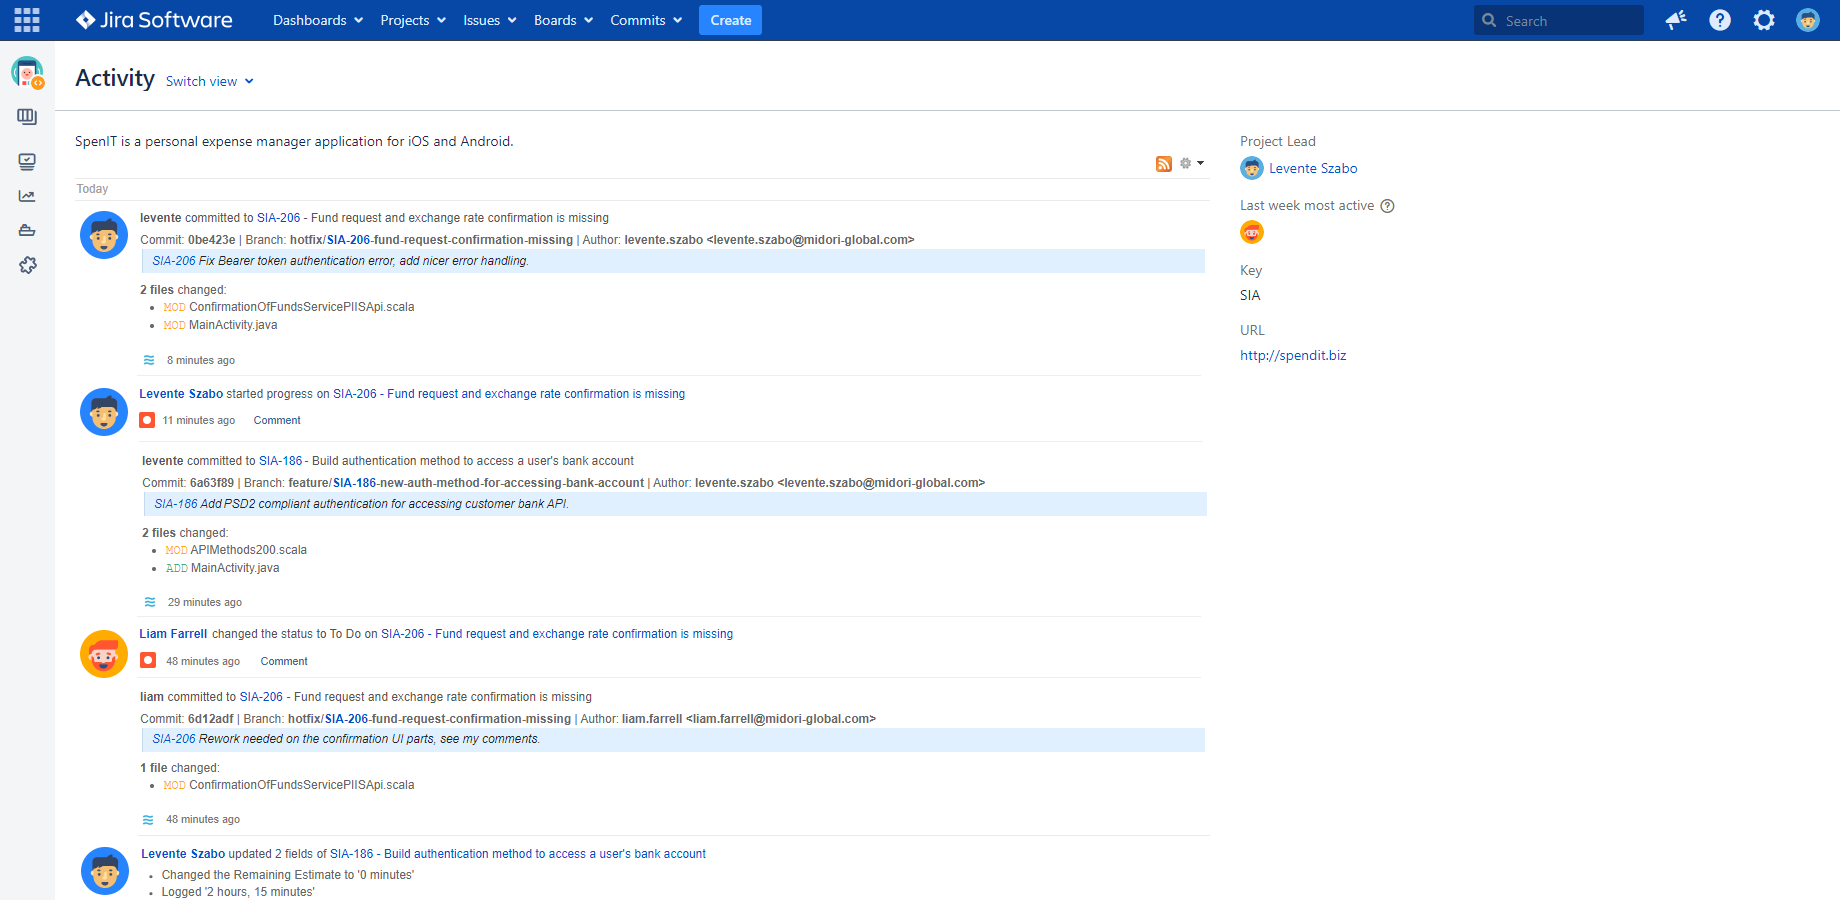 Code commit information posted in the Jira project activity stream